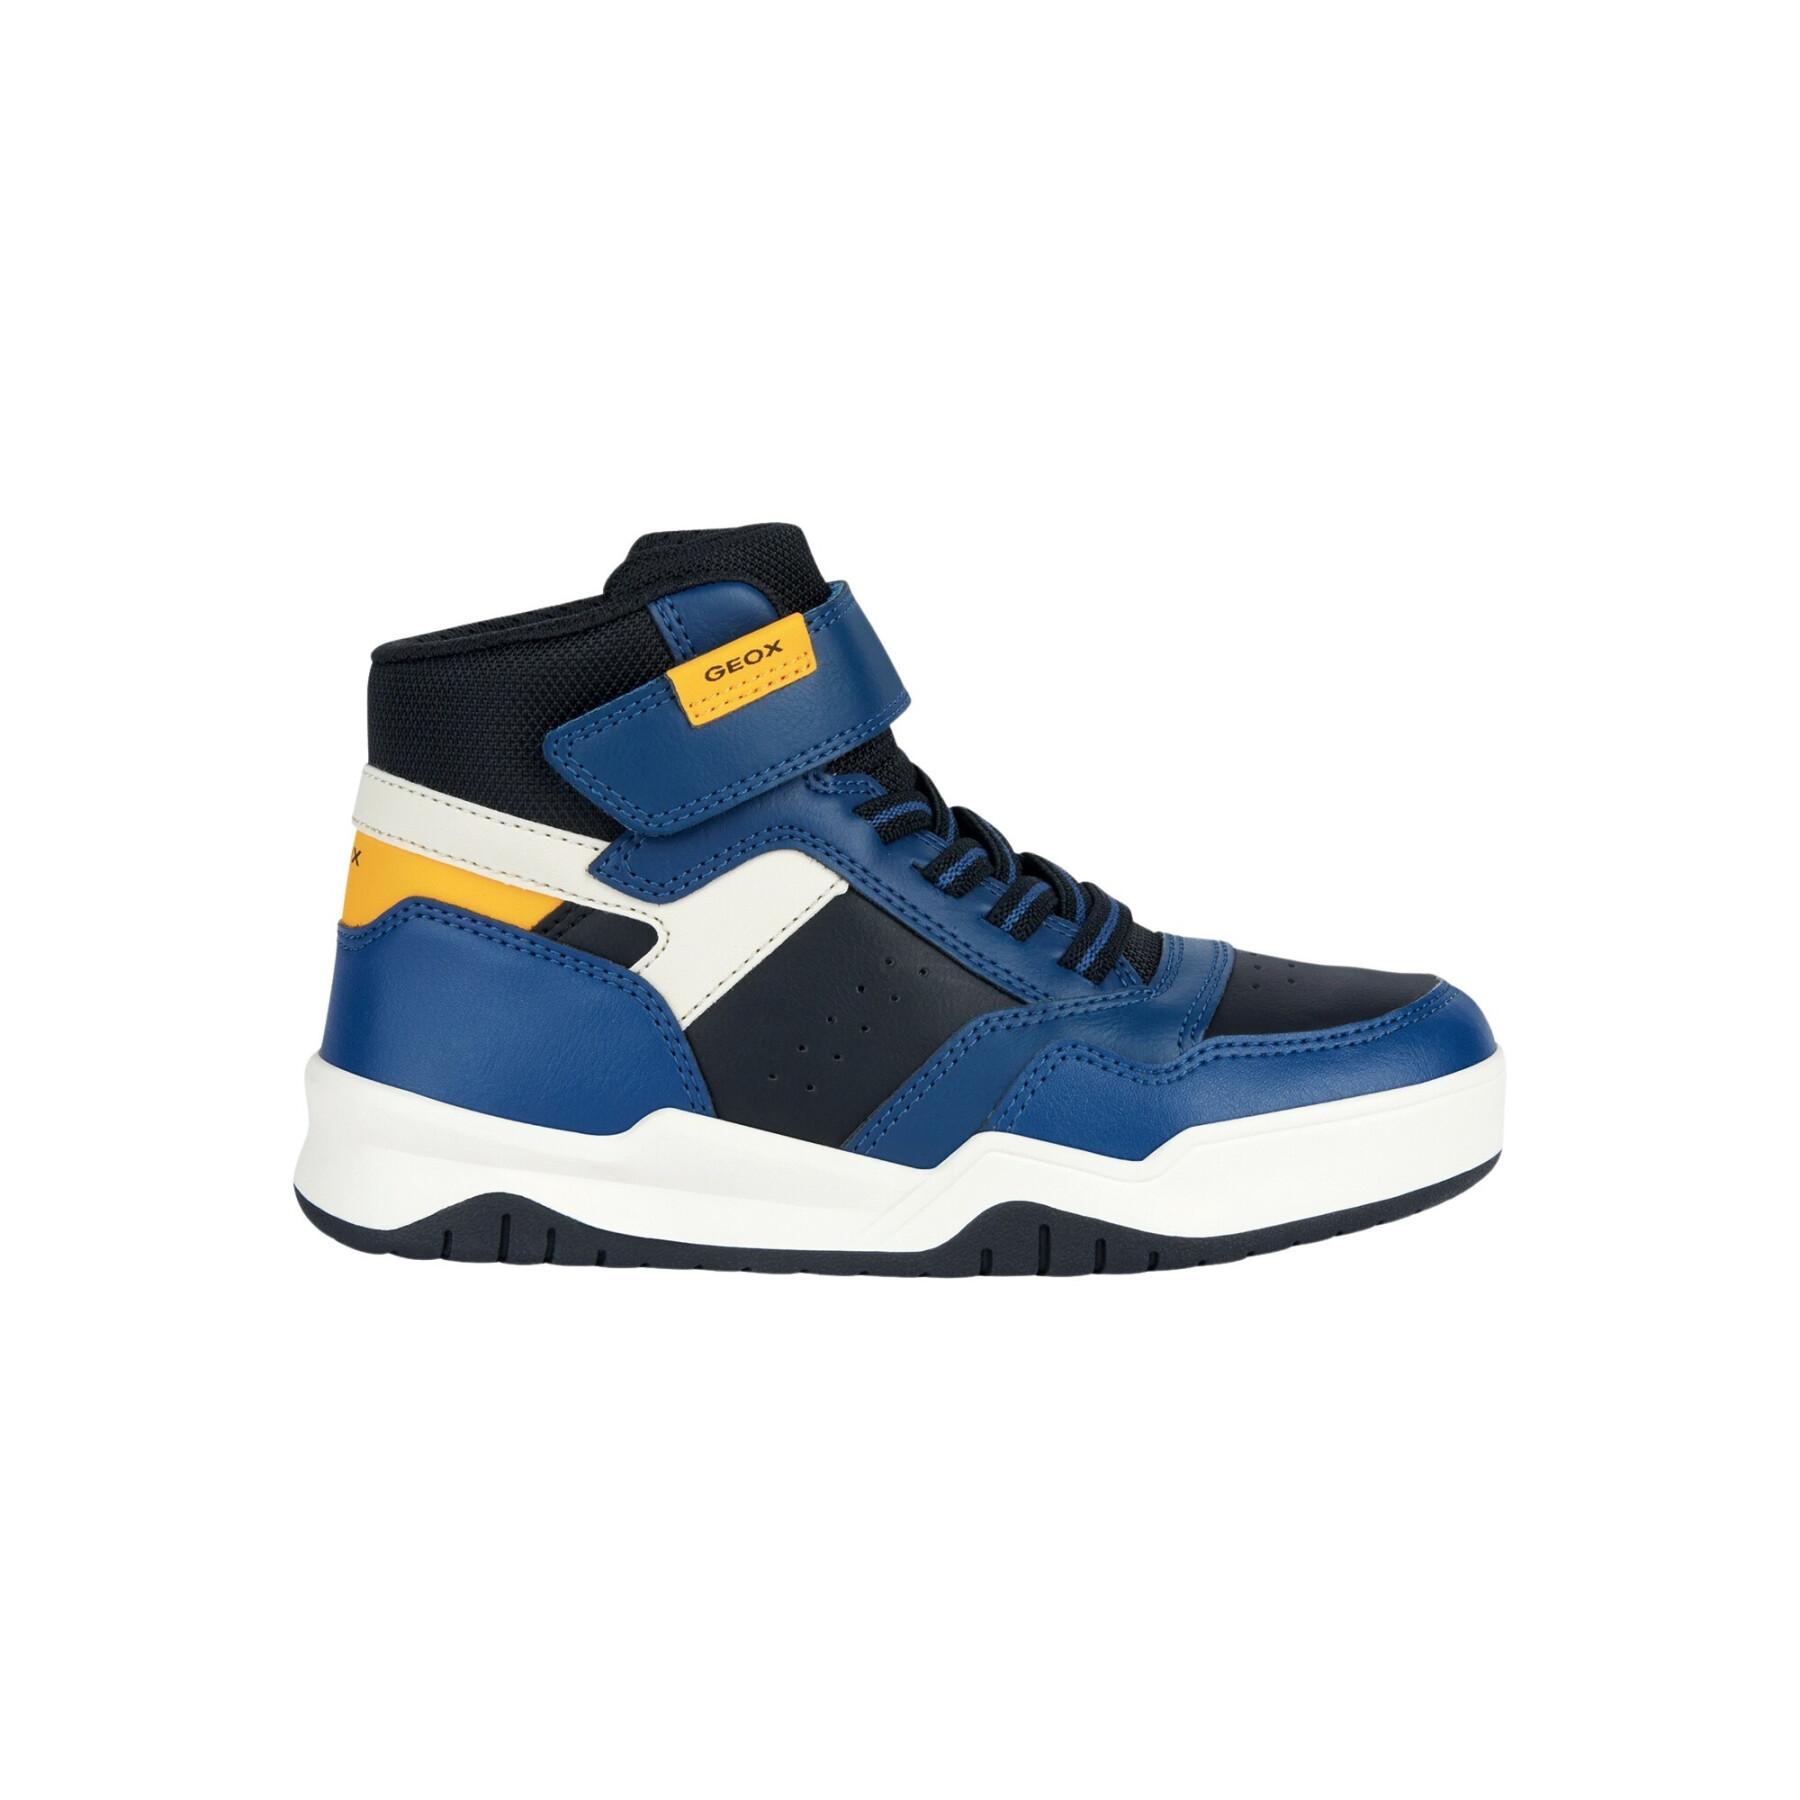 Children's high-top sneakers Geox Perth